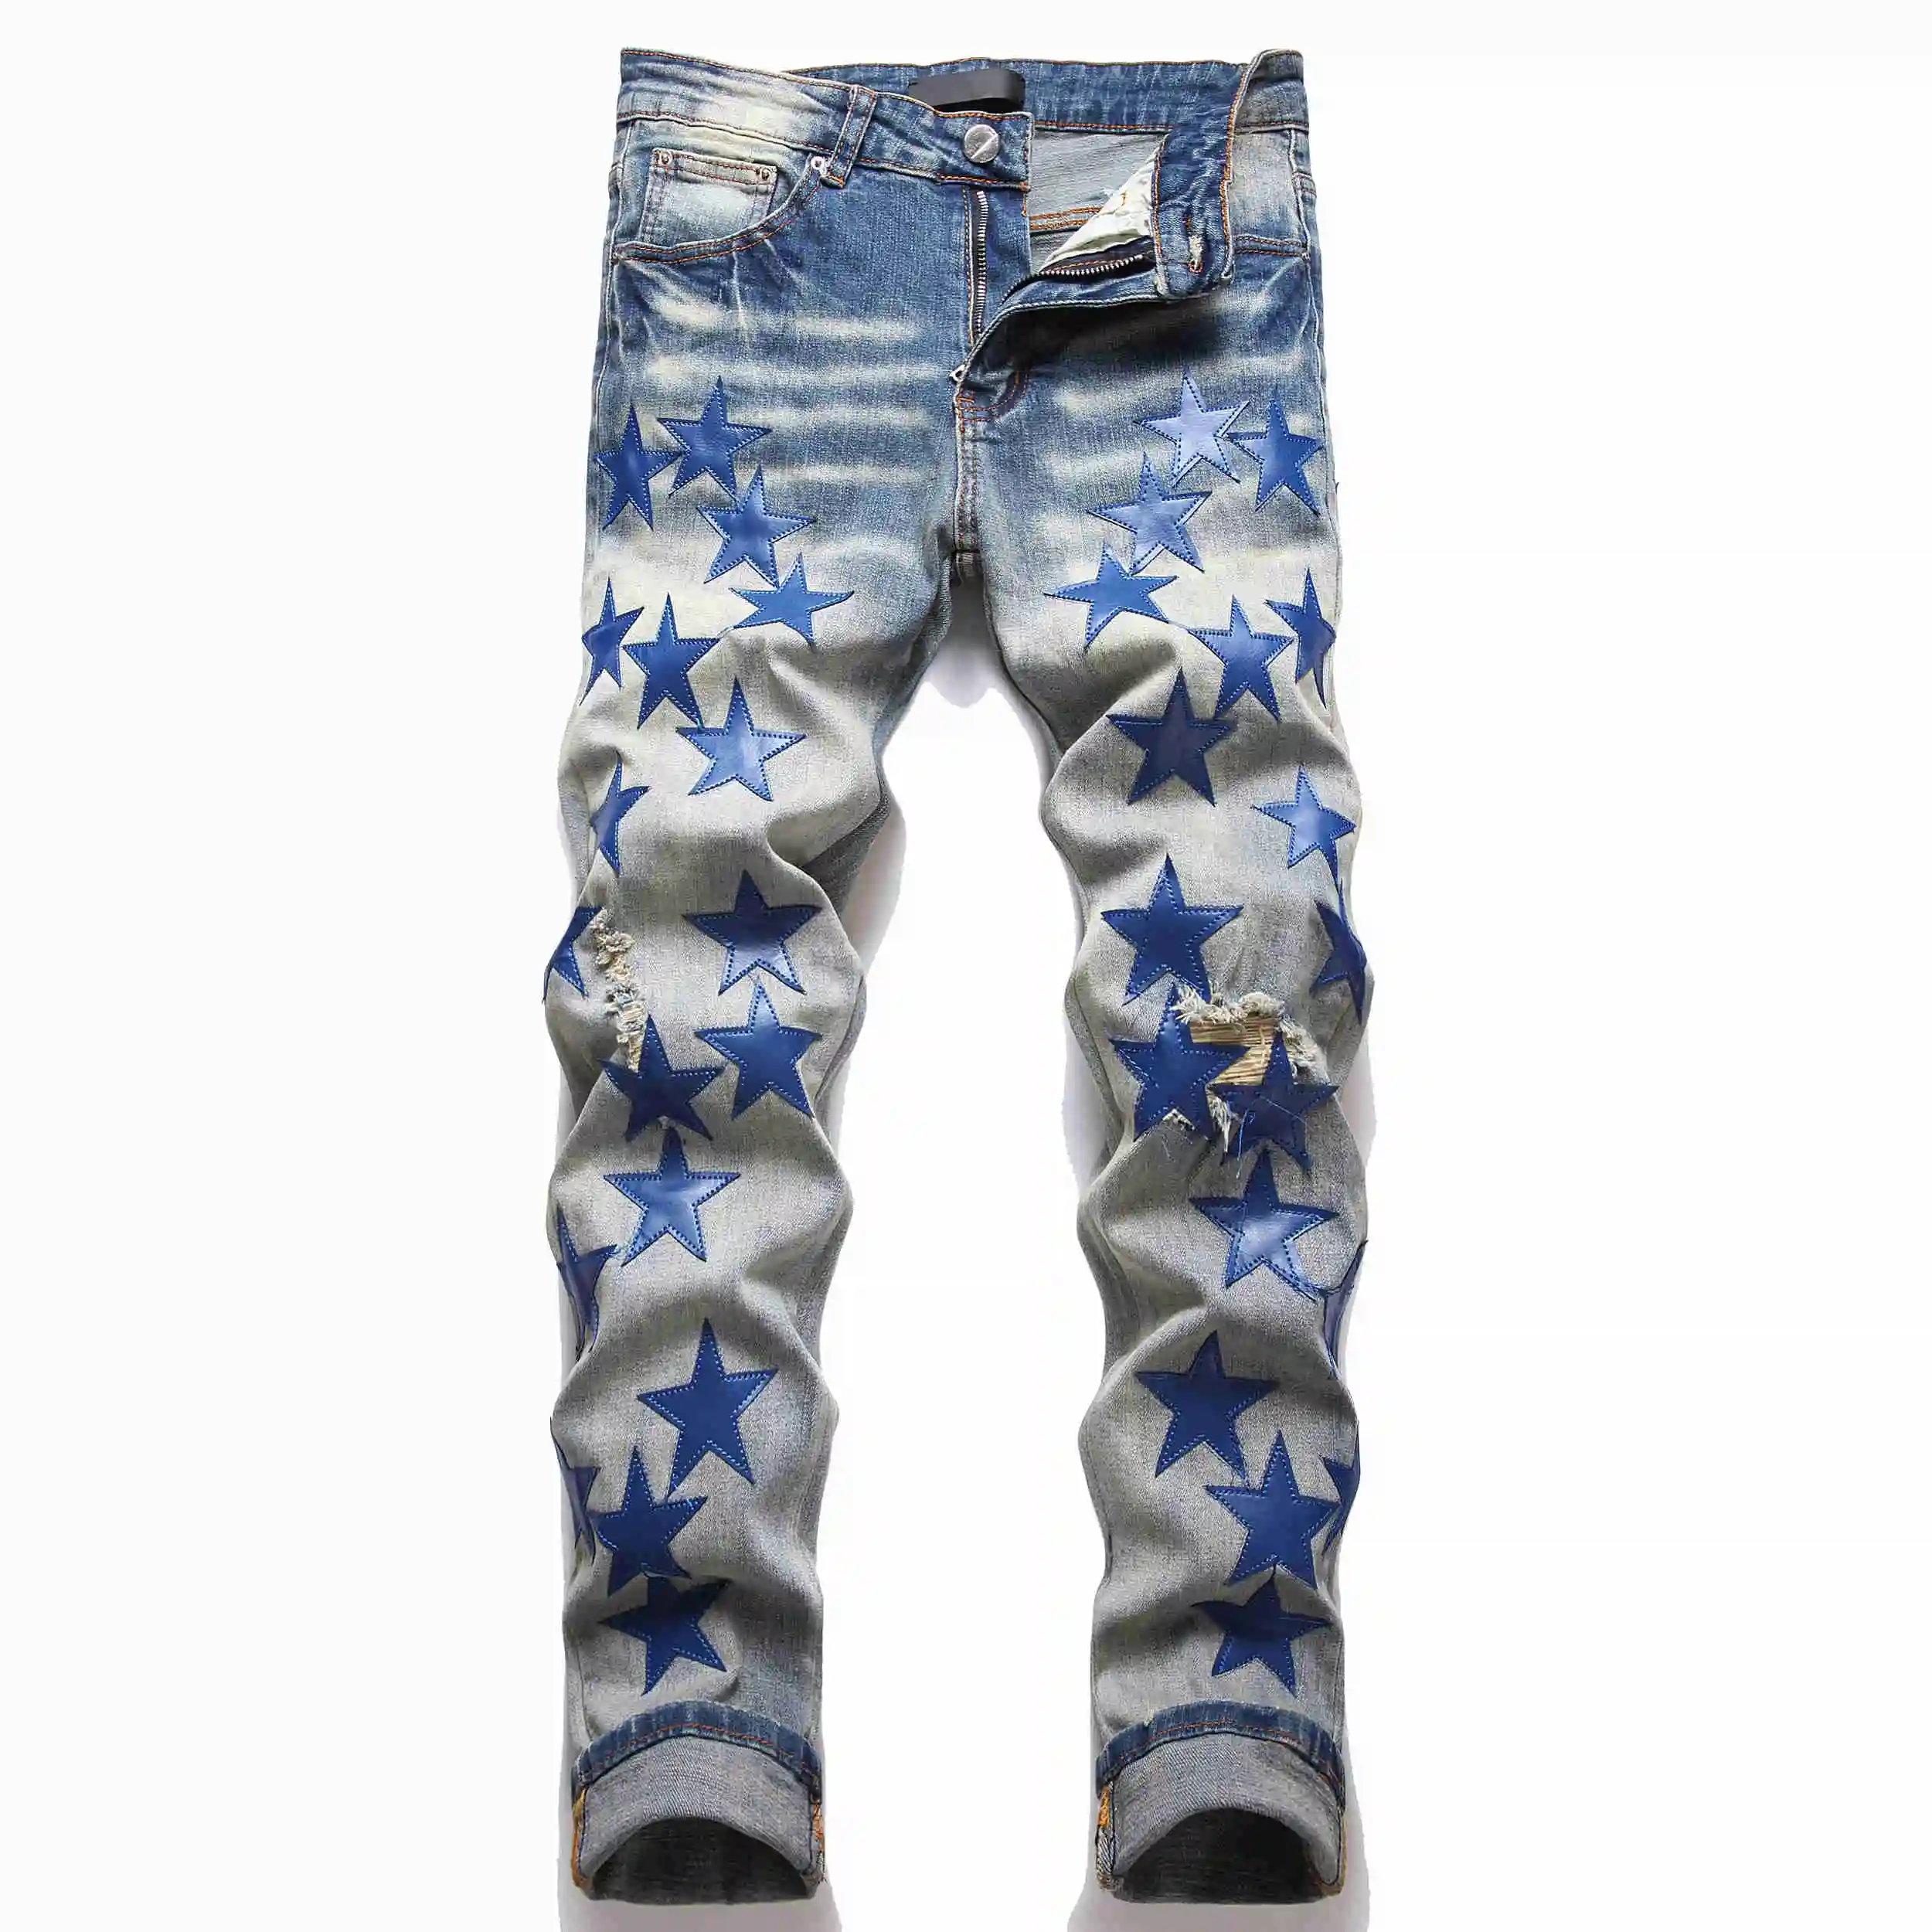 High quality High Street American Jeans Men's Blue Star Patchwork Decoration Blue Loose Straight Pants Jeans